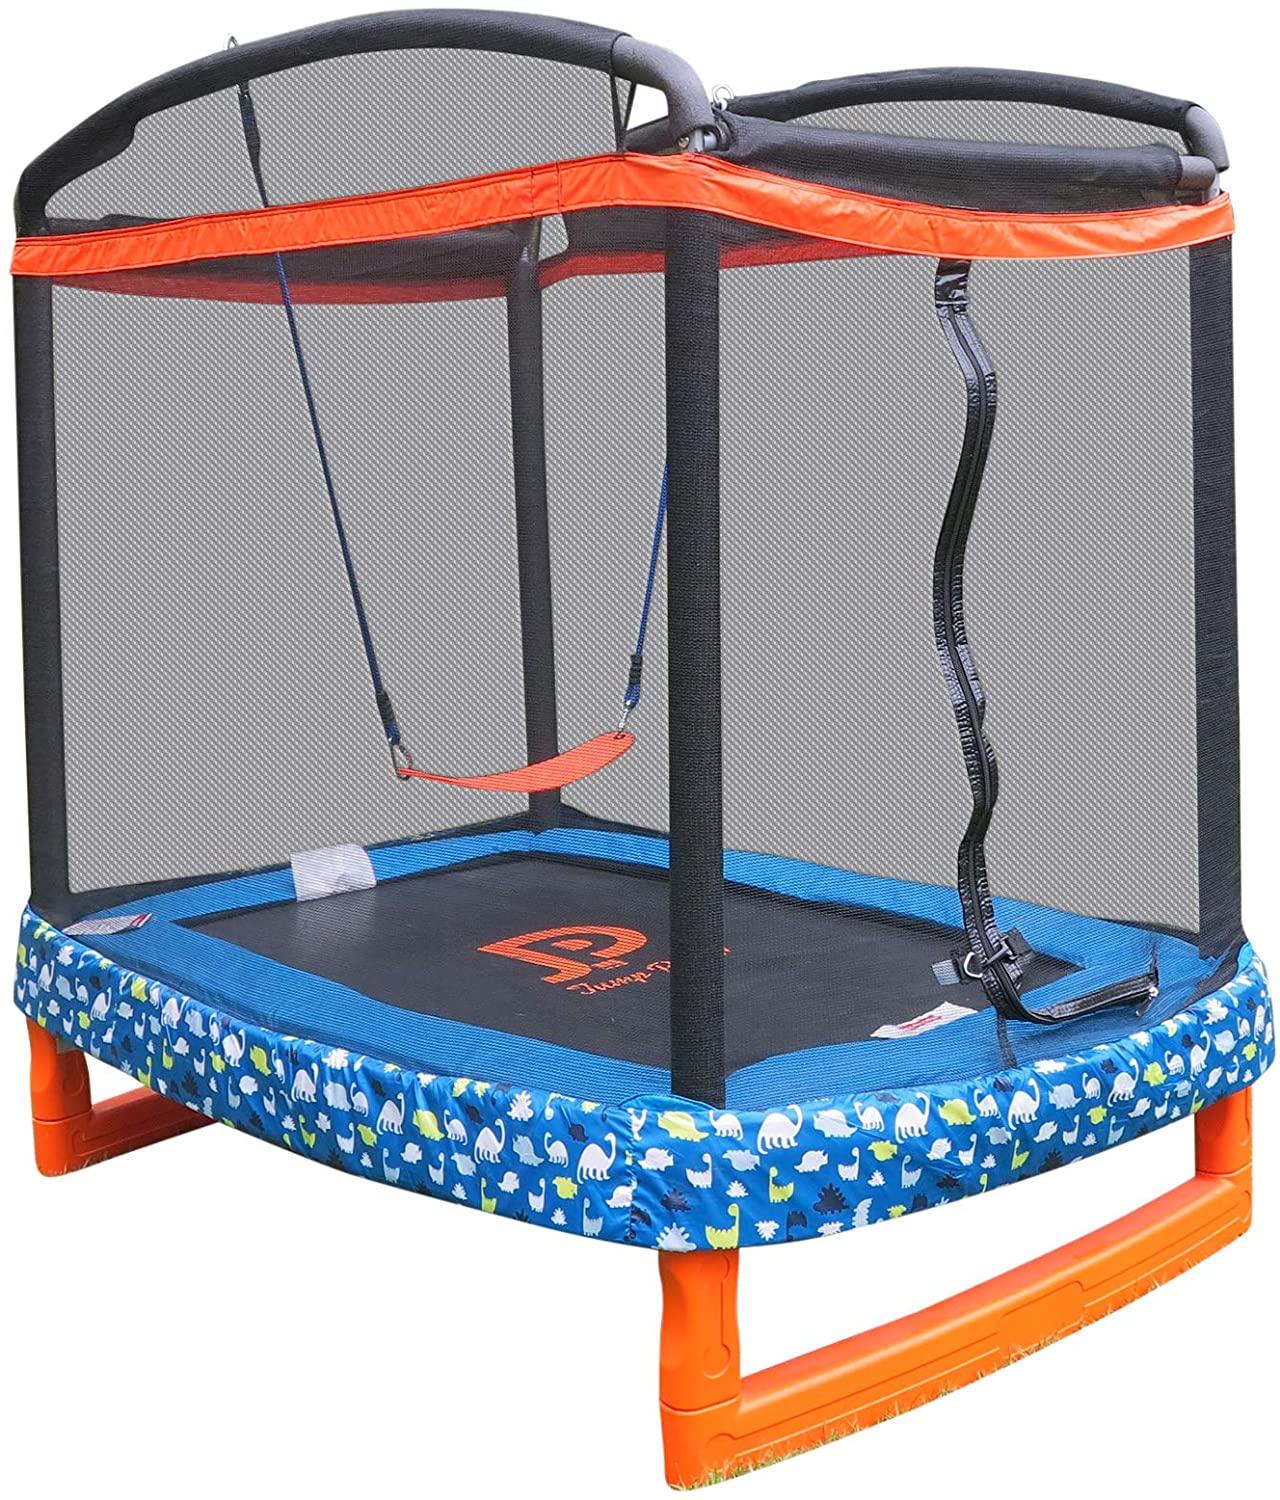 JUMP POWER Rectangle Indoor or Outdoor Trampoline & Safety Net with Swing Combo for Toddlers & Kids